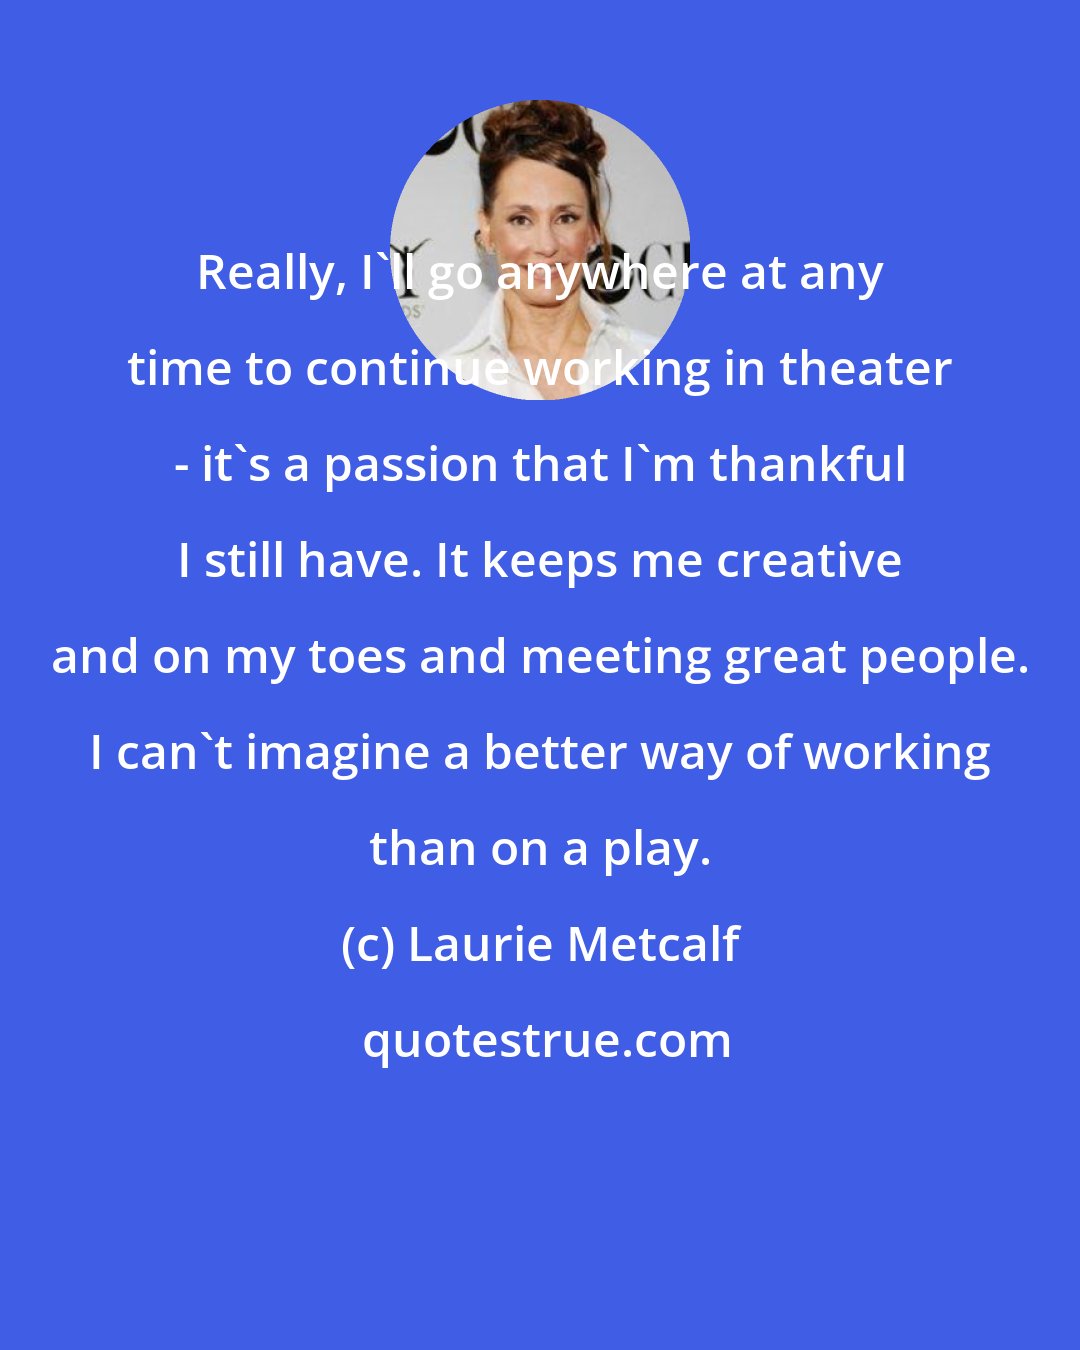 Laurie Metcalf: Really, I'll go anywhere at any time to continue working in theater - it's a passion that I'm thankful I still have. It keeps me creative and on my toes and meeting great people. I can't imagine a better way of working than on a play.